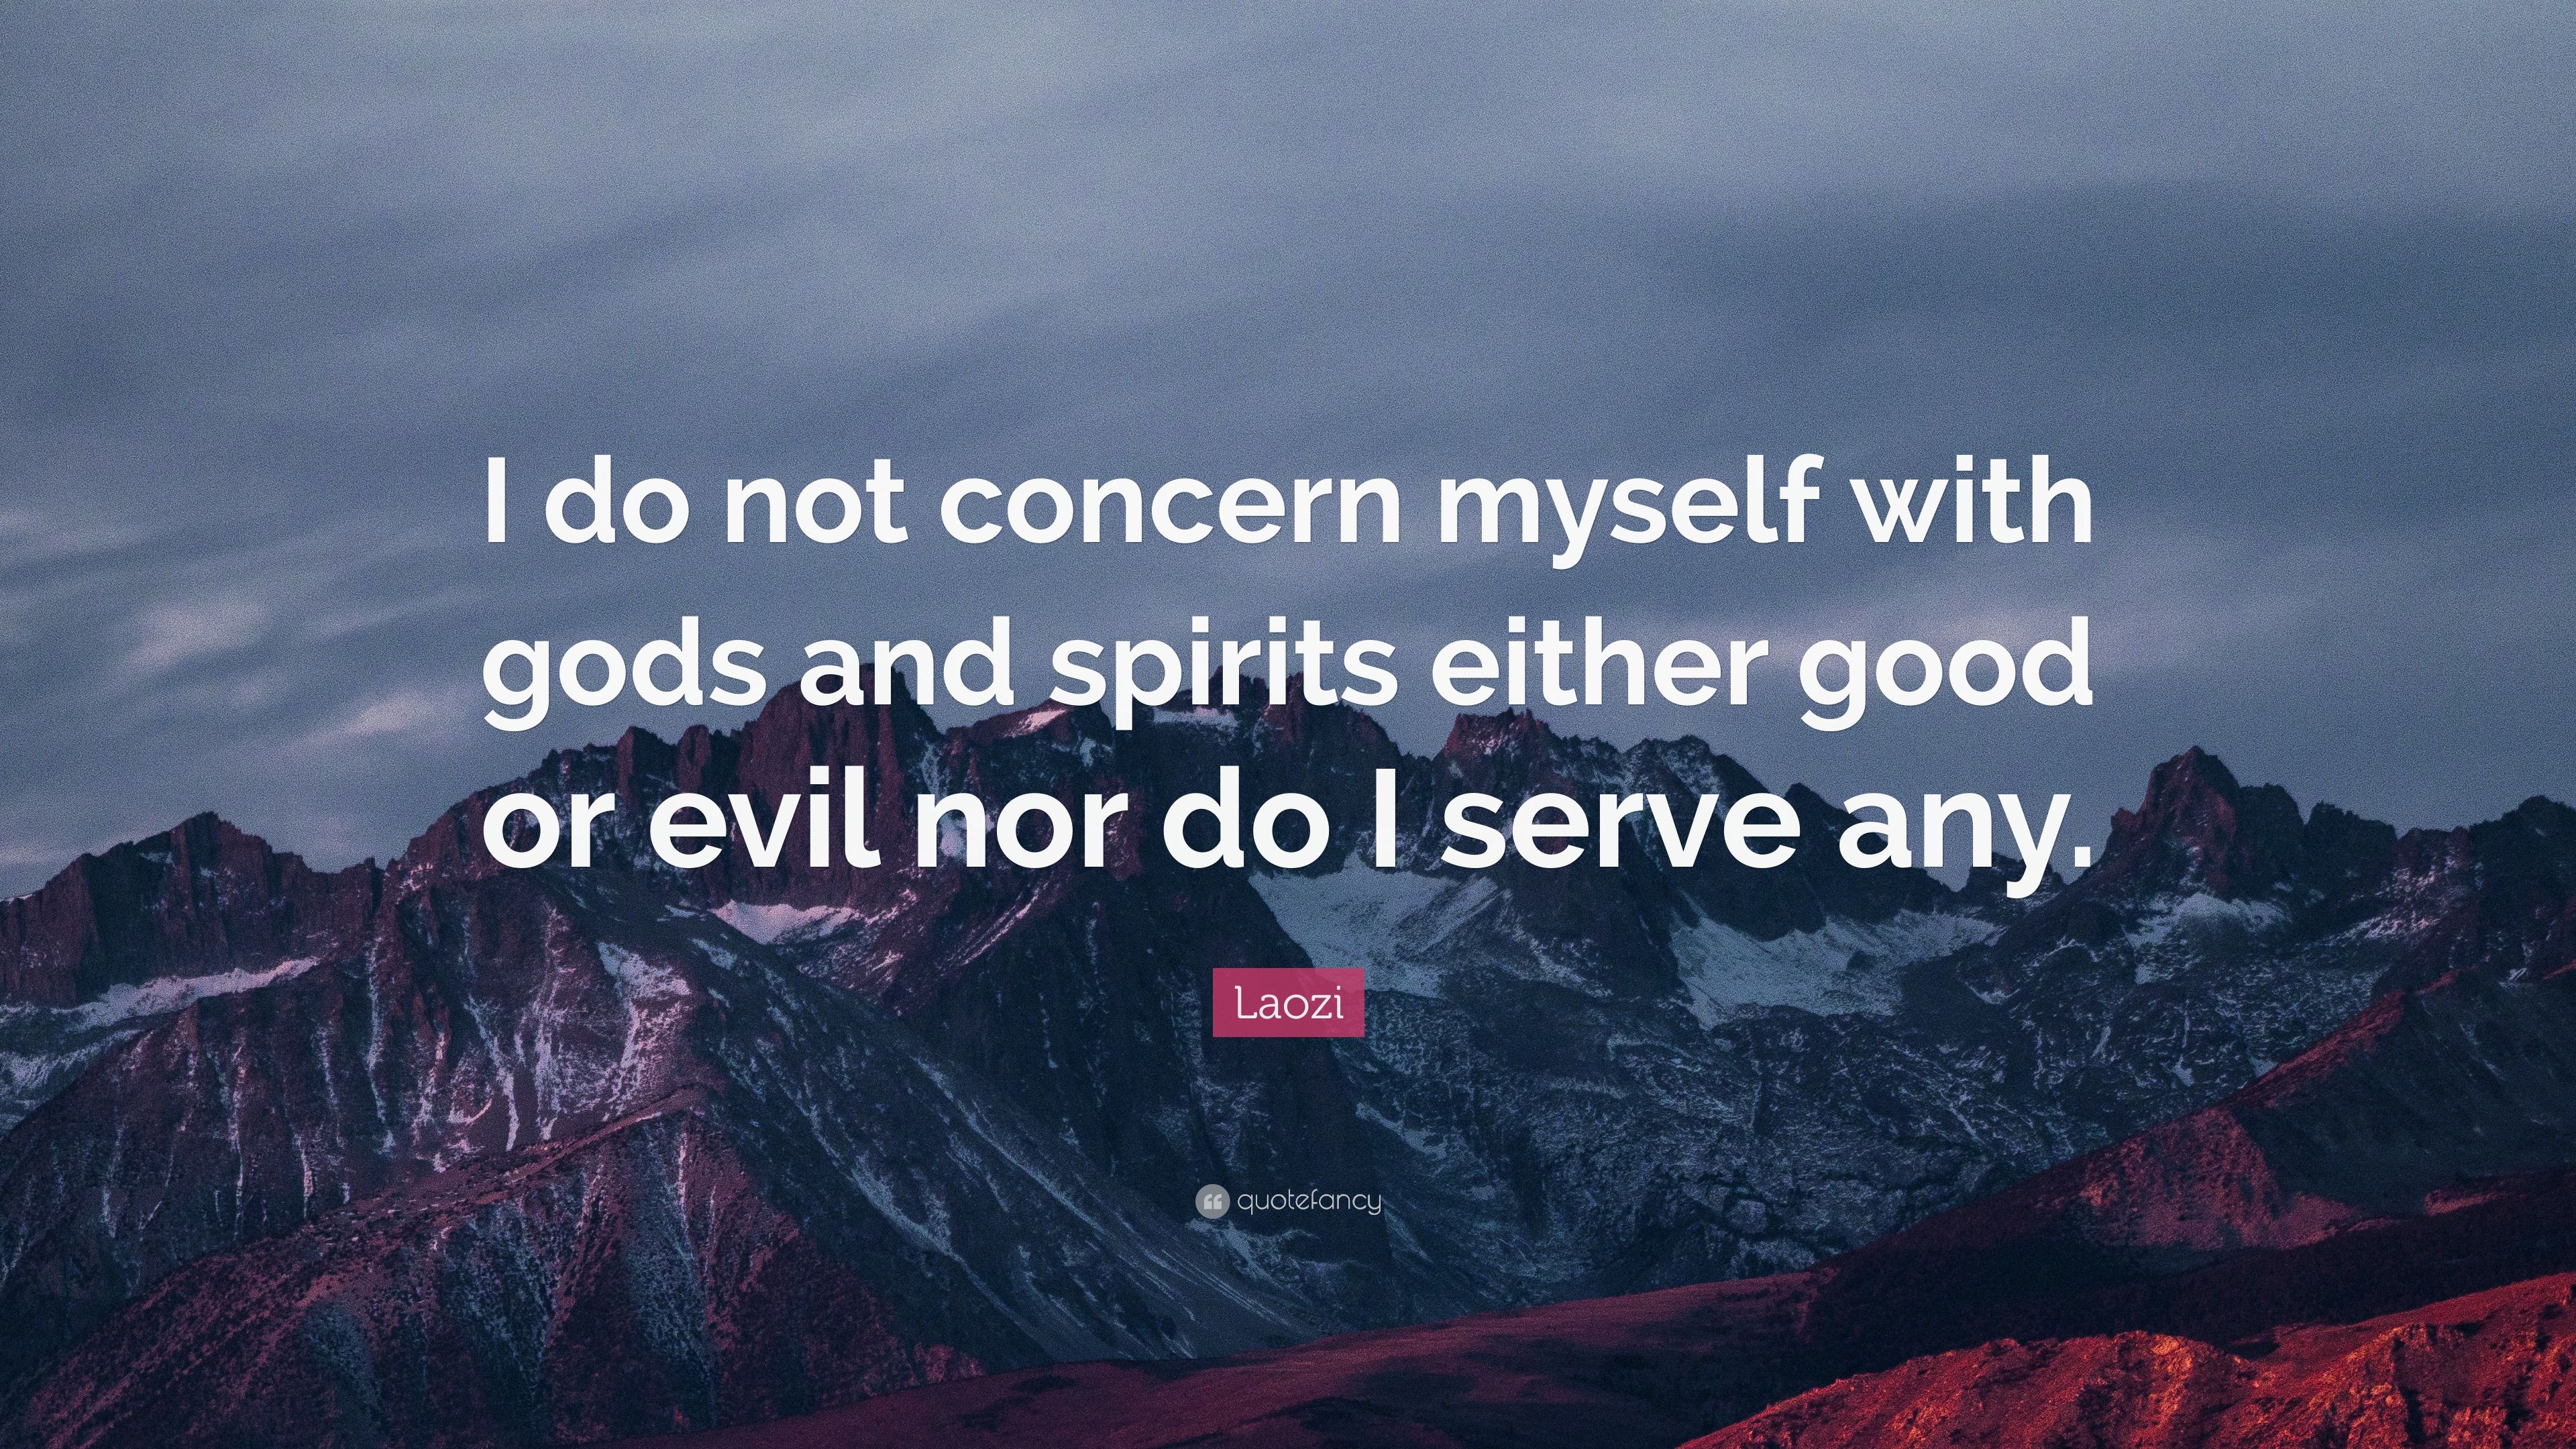 Laozi Quote: “I do not concern myself with gods and spirits